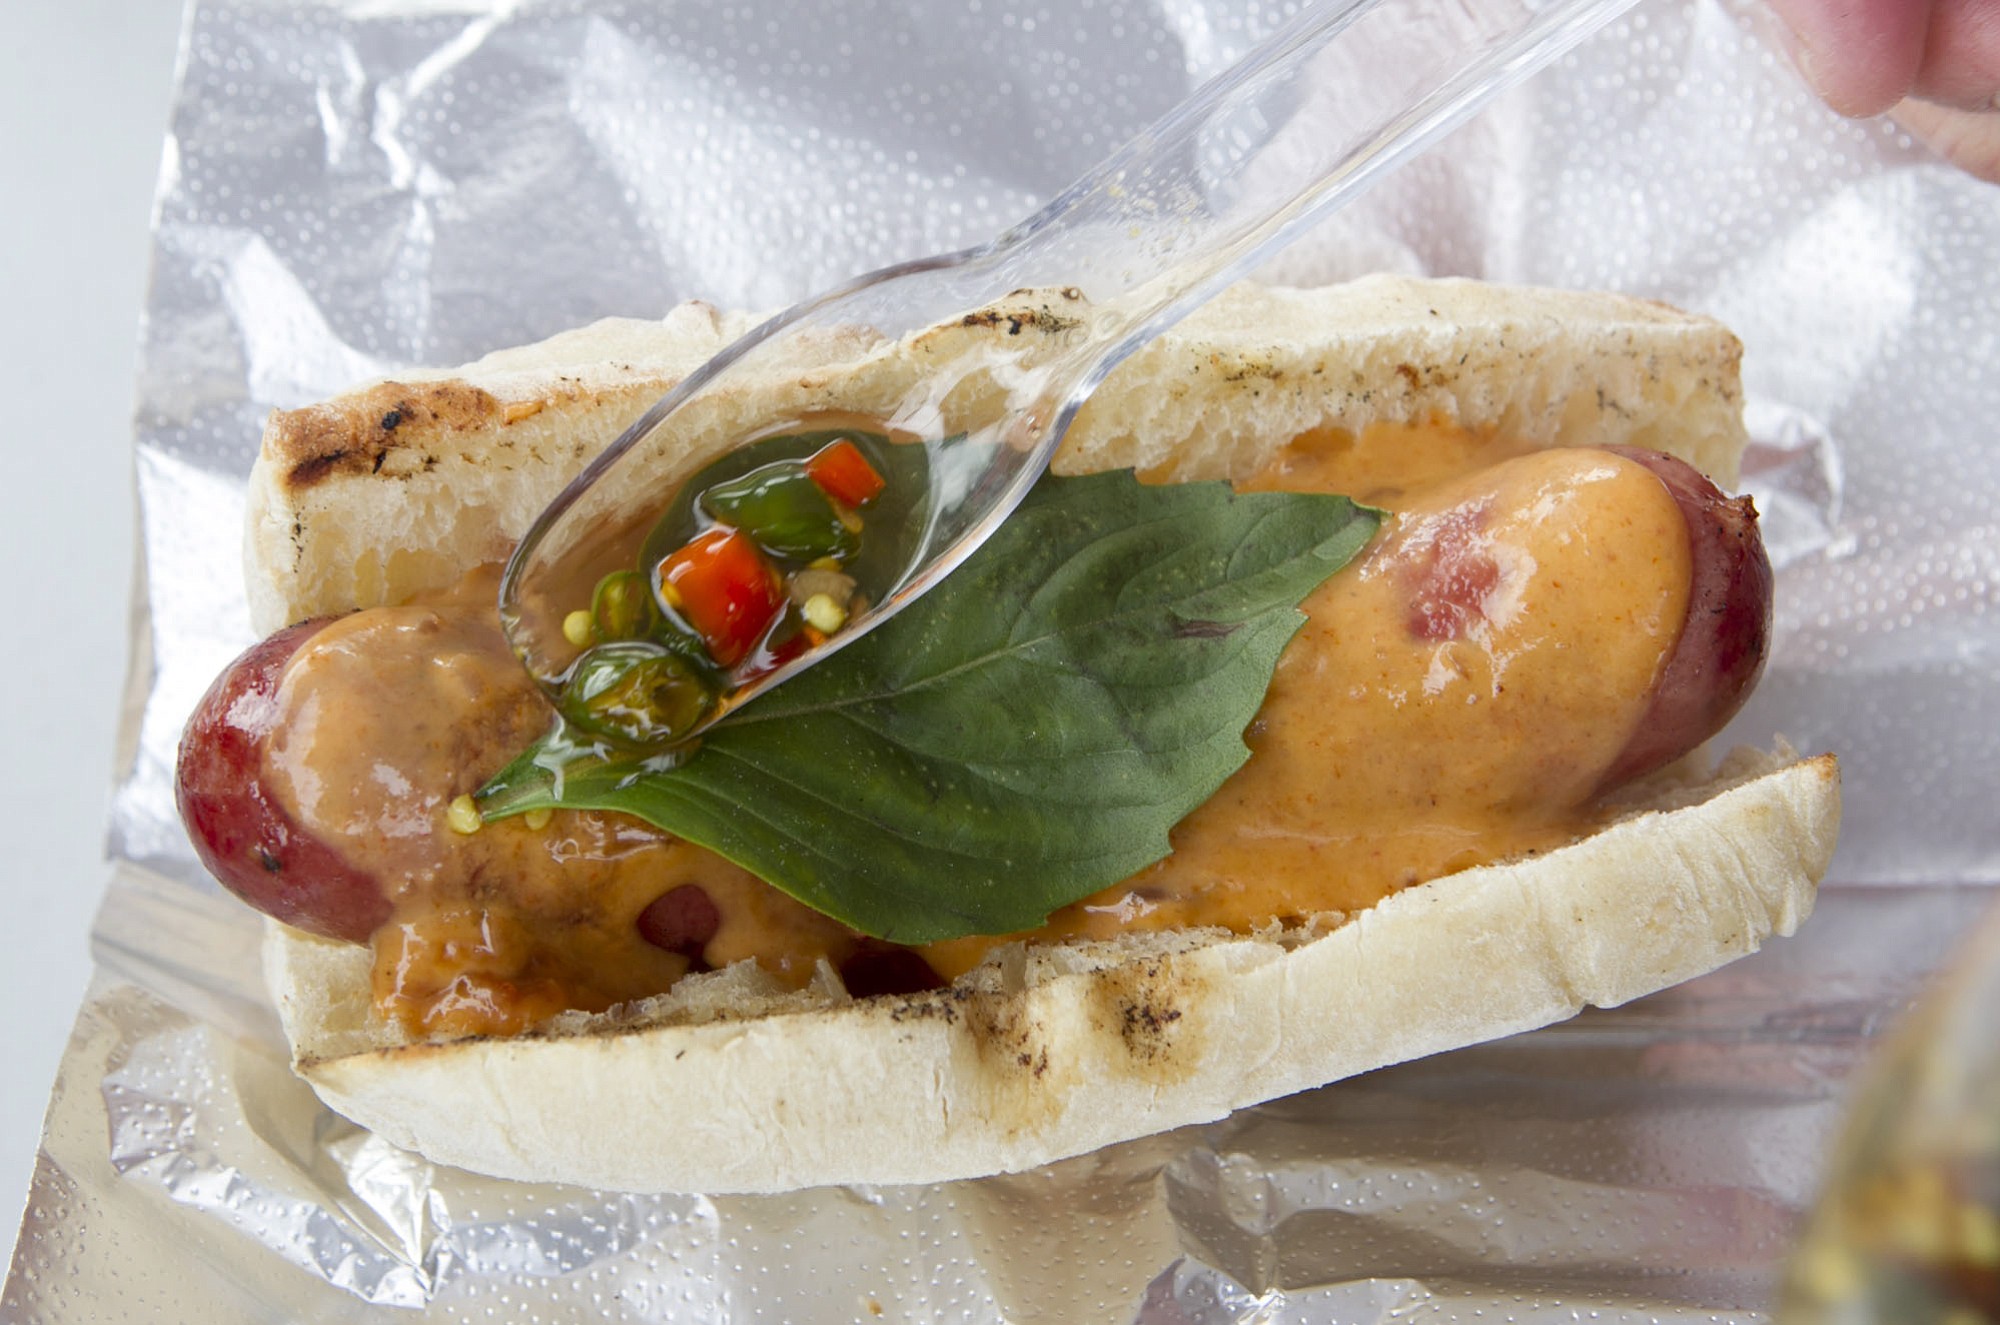 A Thai Curry Dog with penang curry, Thai basil and a homemade chili sauce is served Feb. 10 at The Nomad food cart in Vancouver.